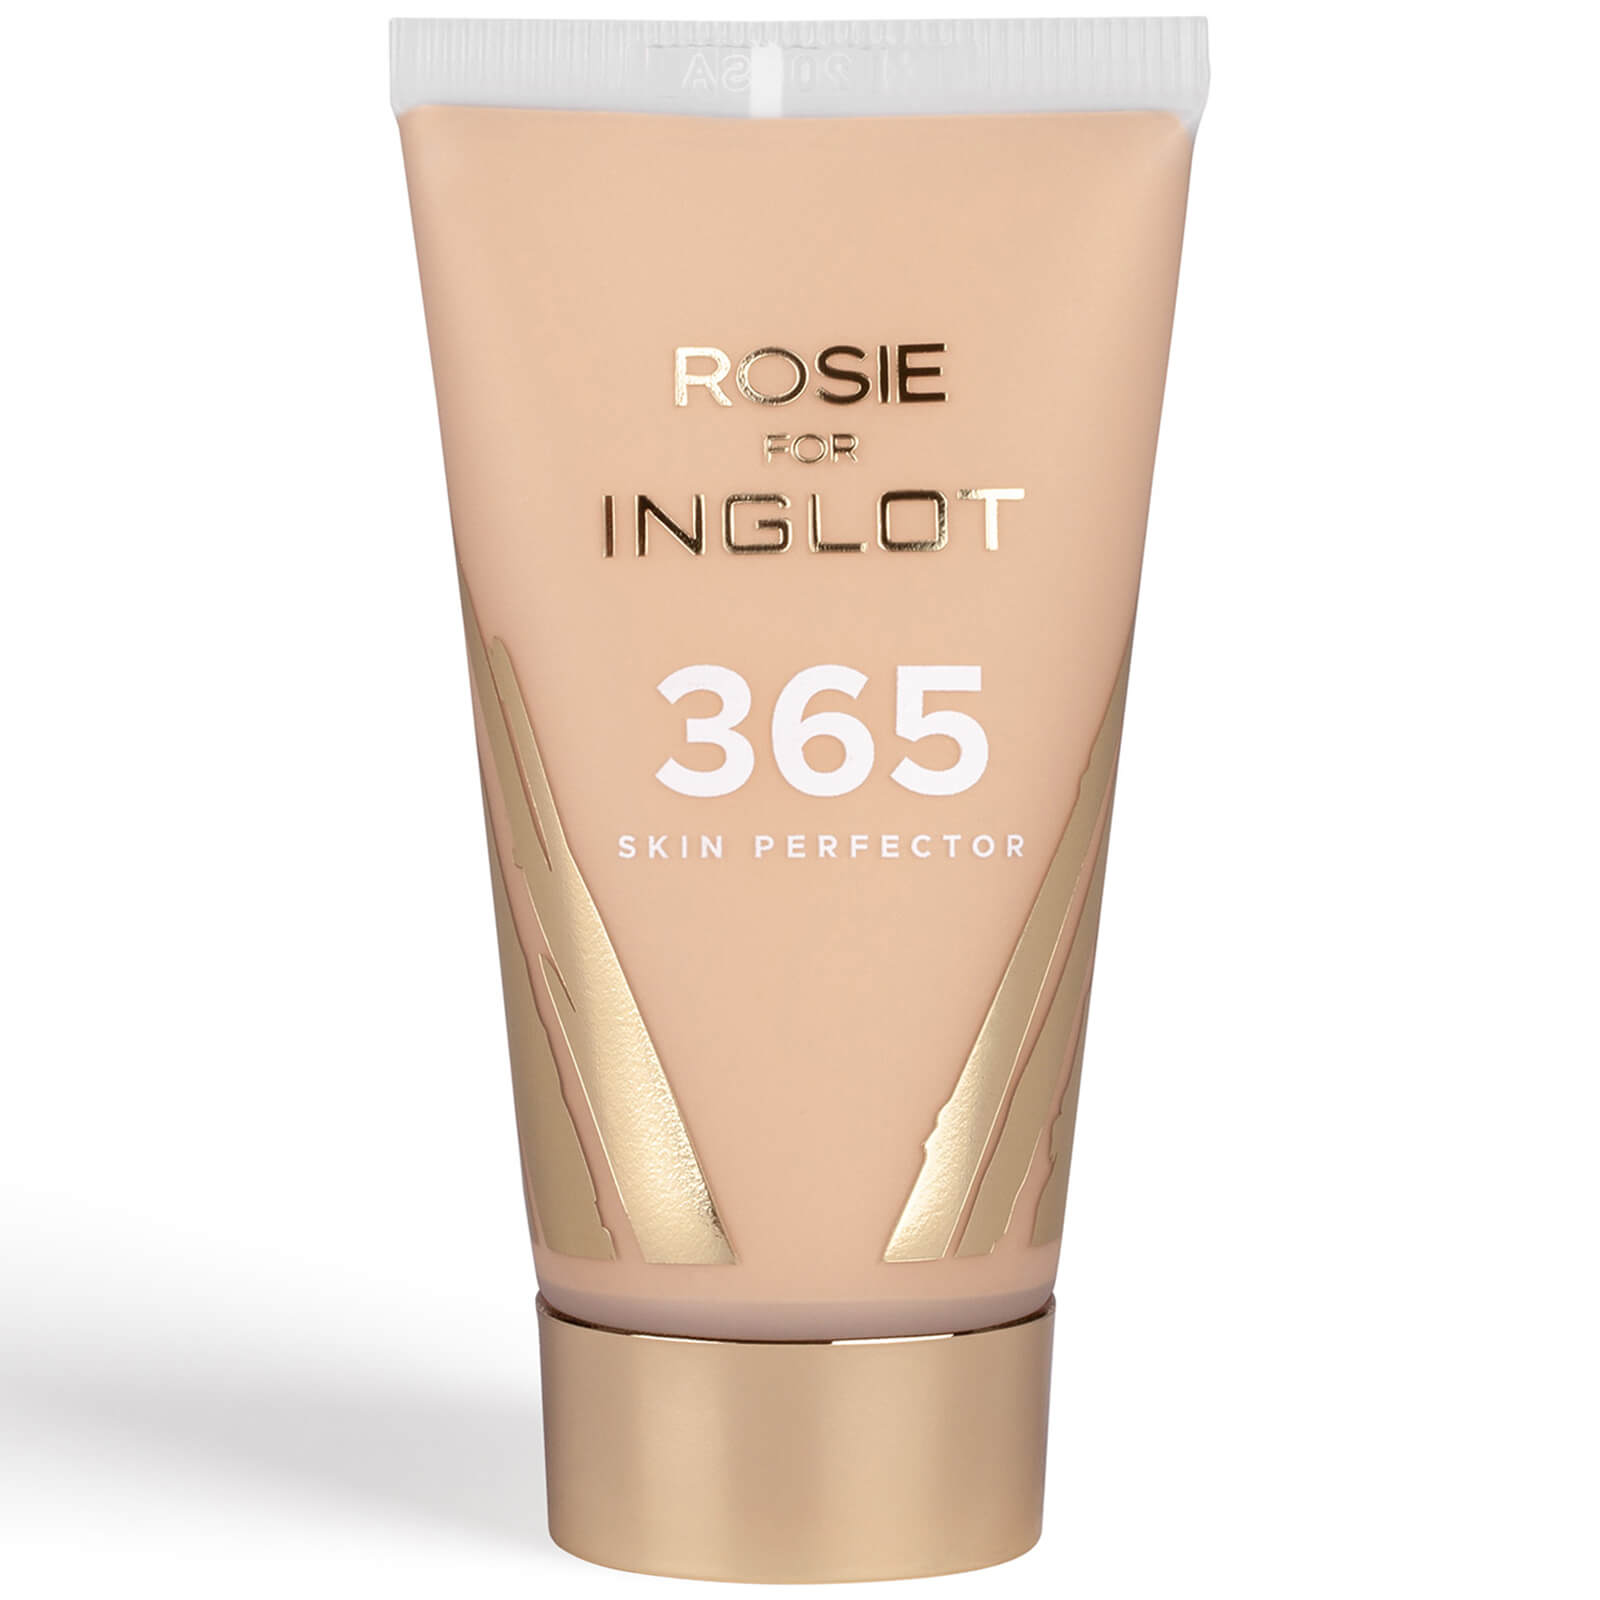 Inglot Rosie for Inglot 365 Skin Perfector 30ml (Various Shades) - Soft Glow